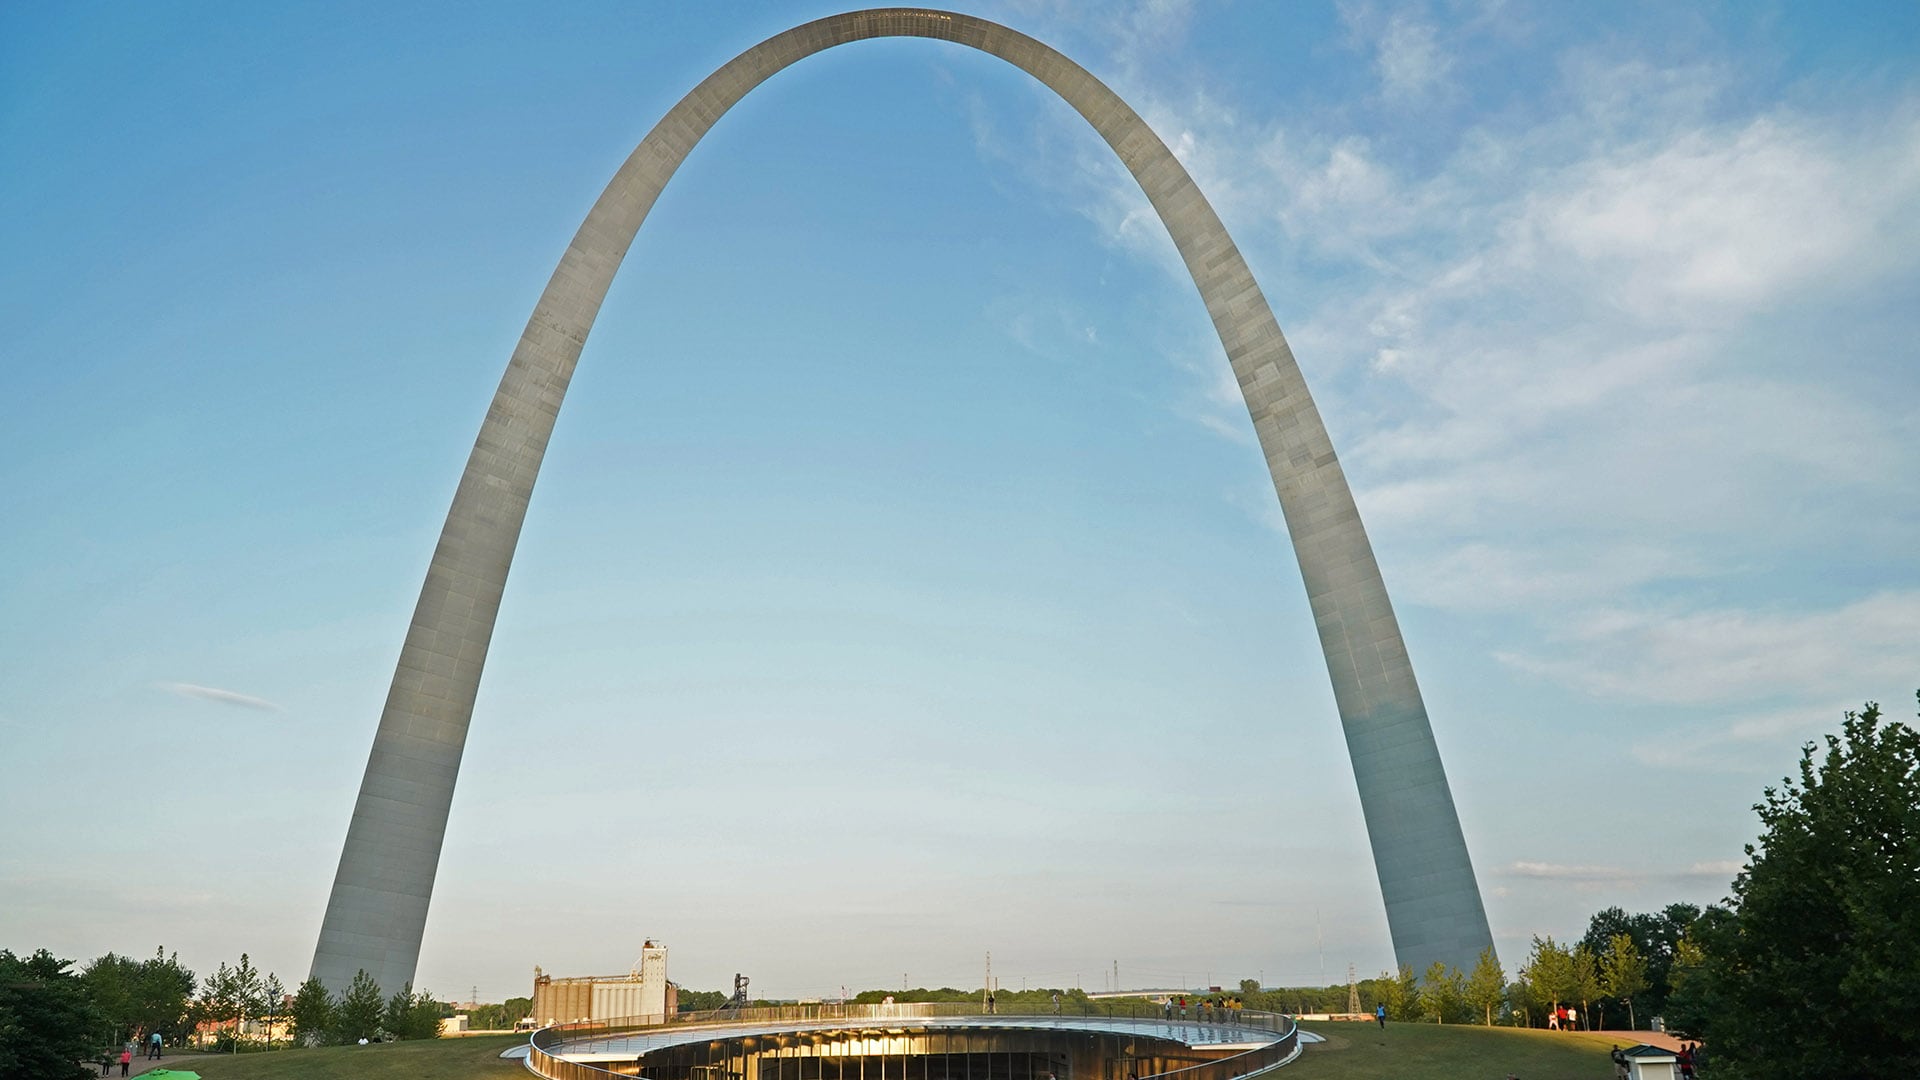 Architect Eero Saarinen created the Arch after winning a national competition to design the monument for St. Louis in 1947.